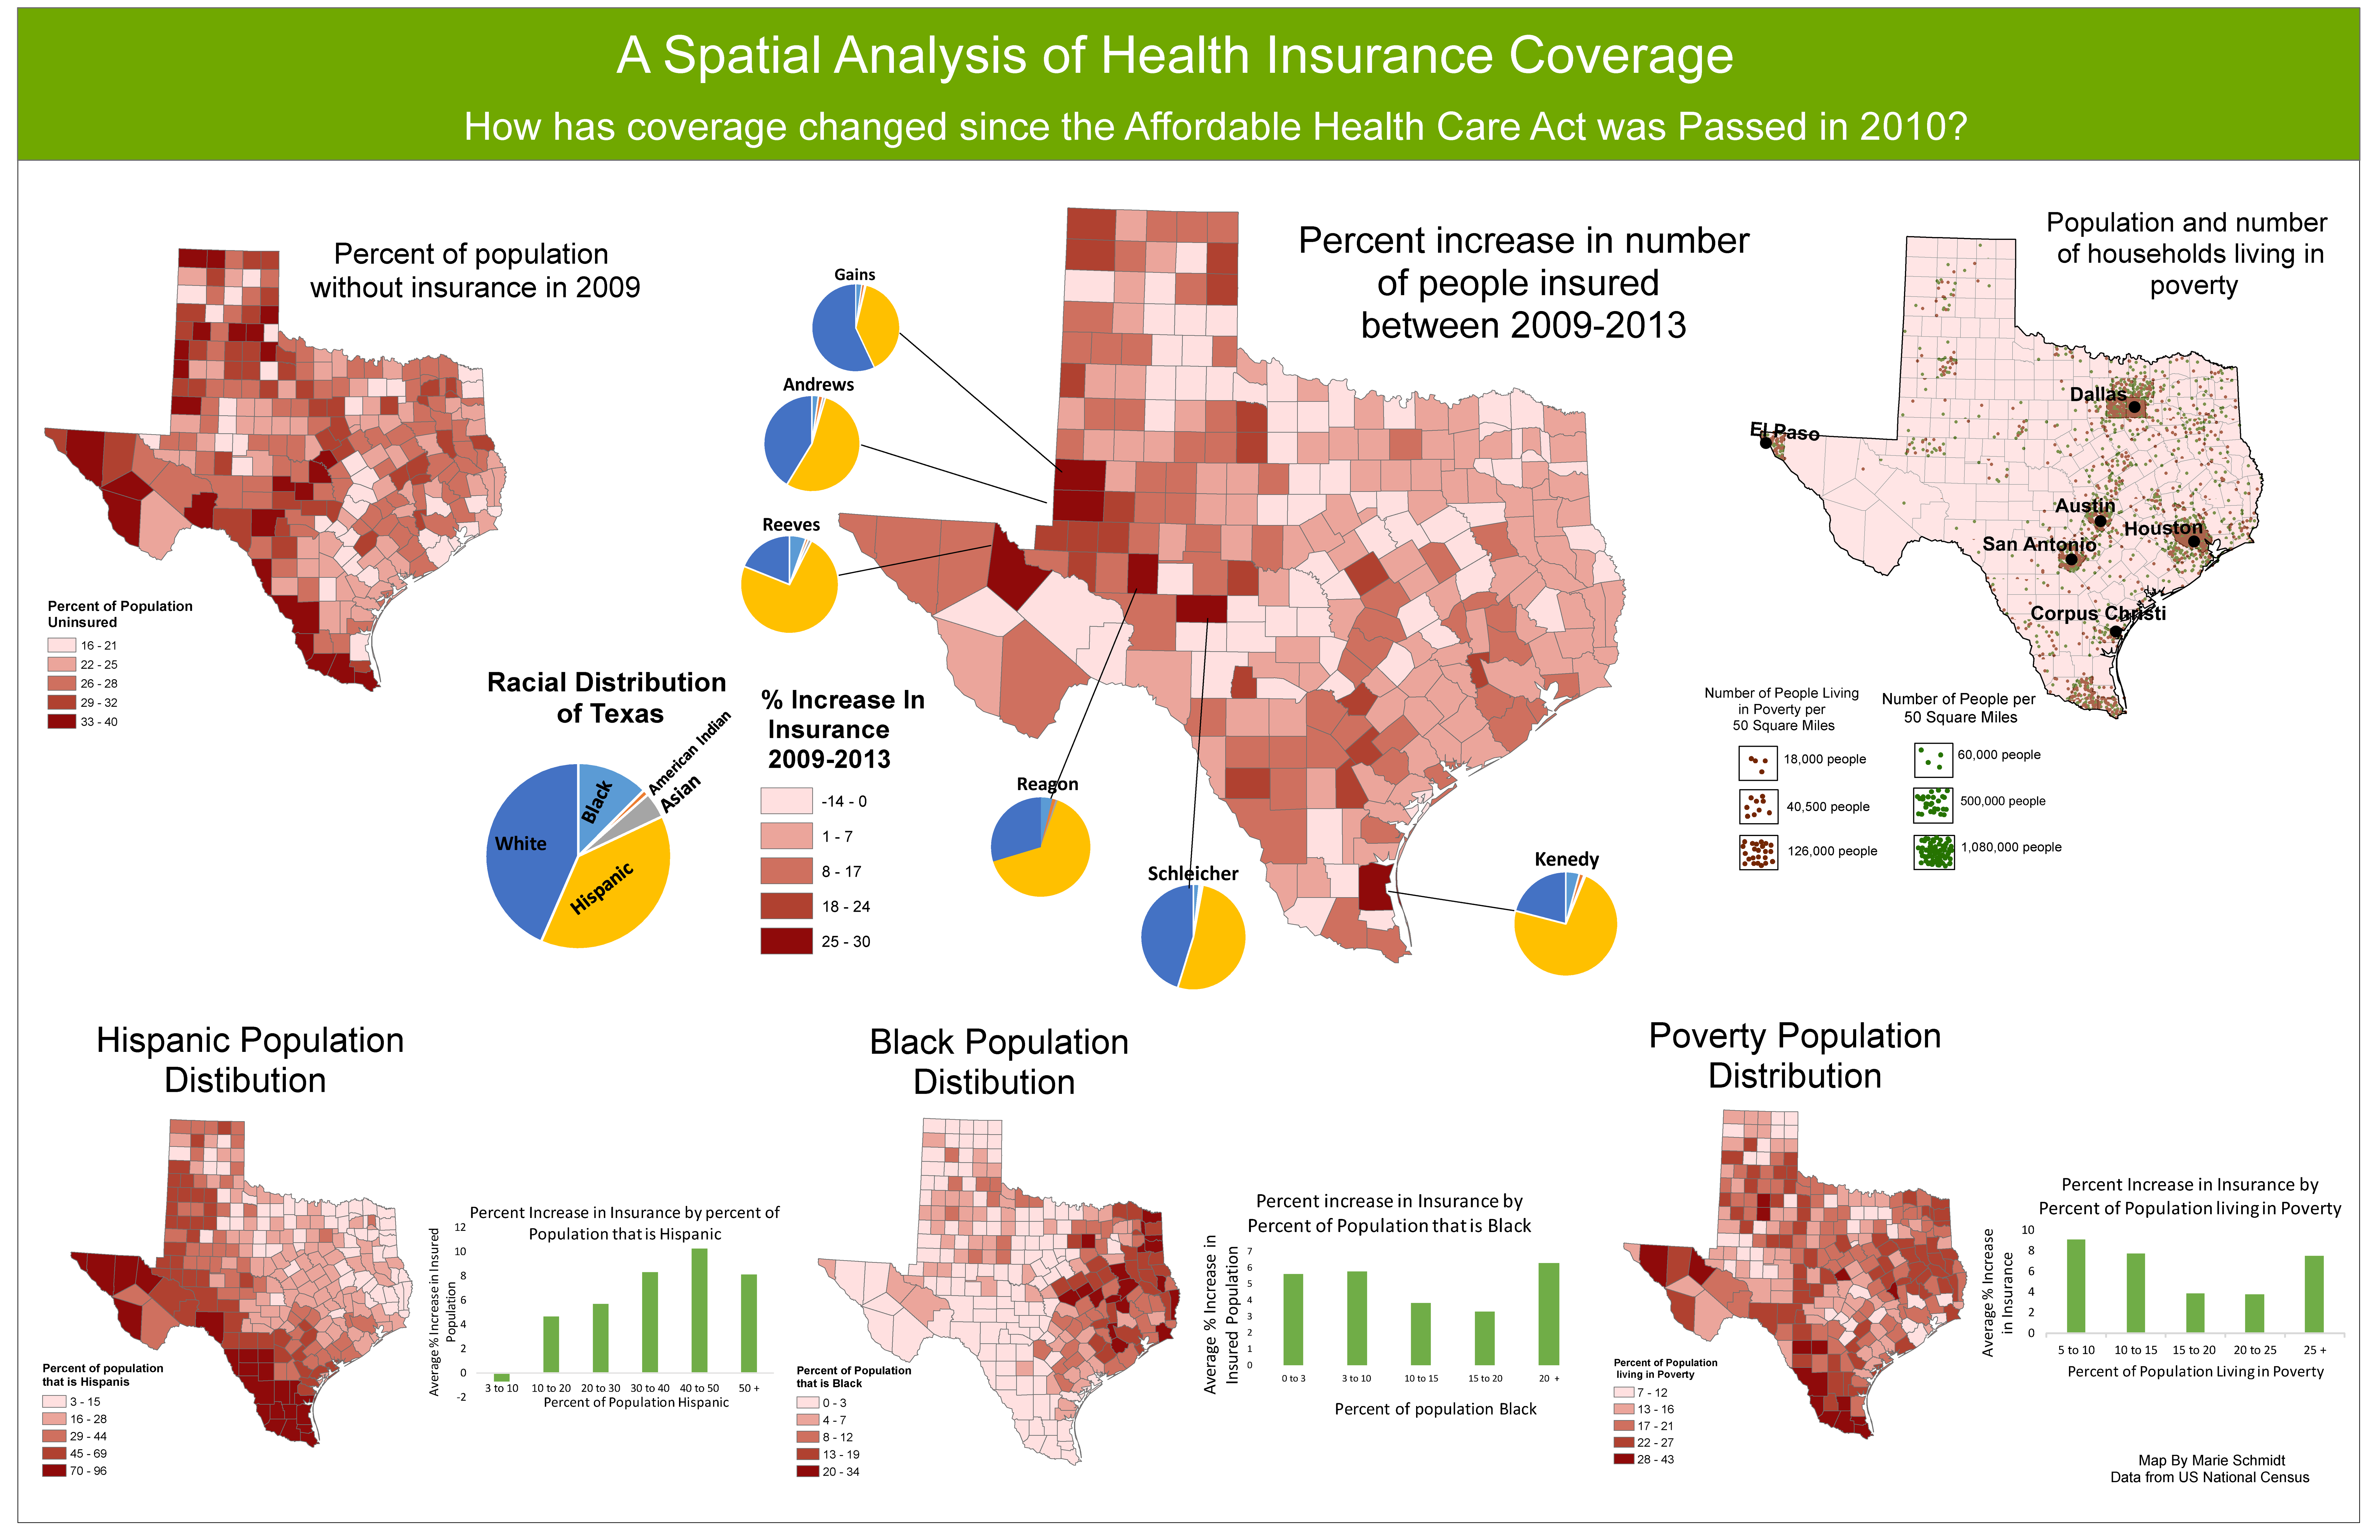 Spatial Analysis of Health Insurance Coverage in Texas